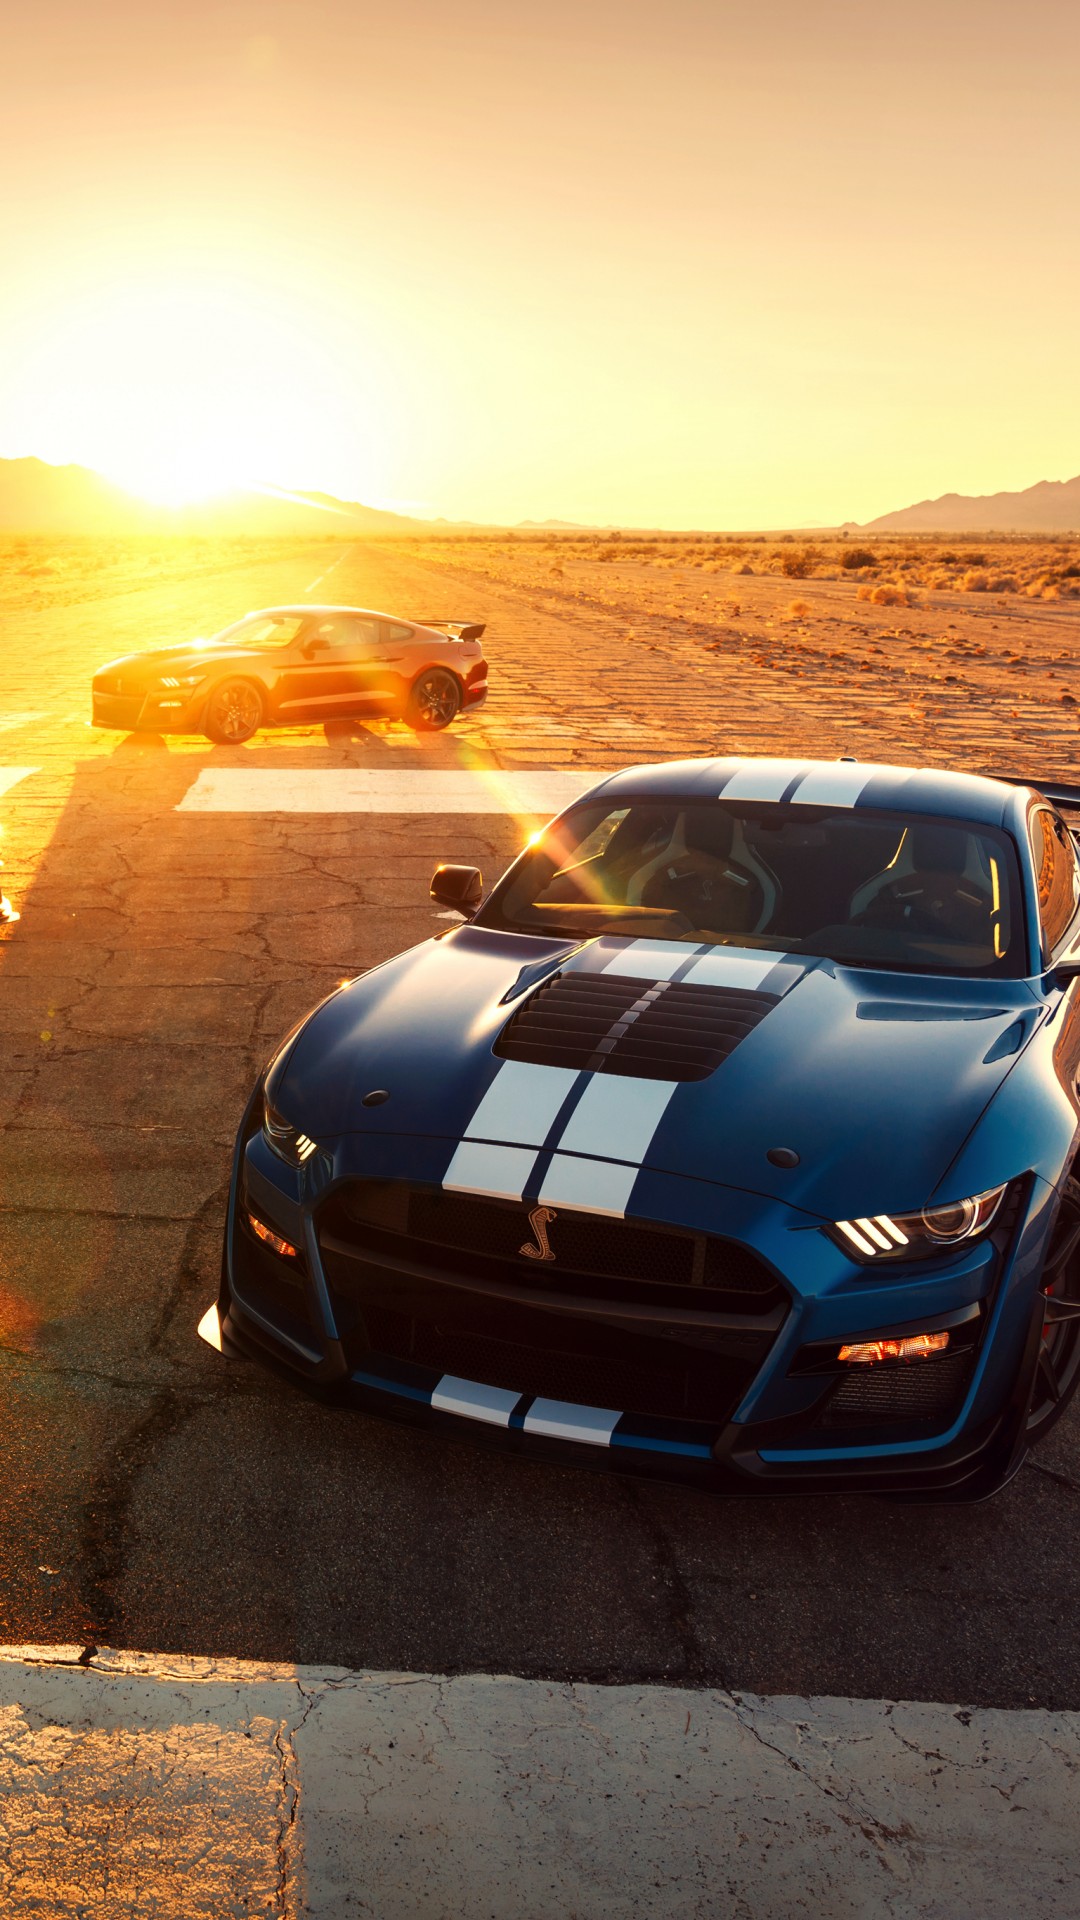 2019 Ford Mustang Shelby Gt500 - HD Wallpaper 